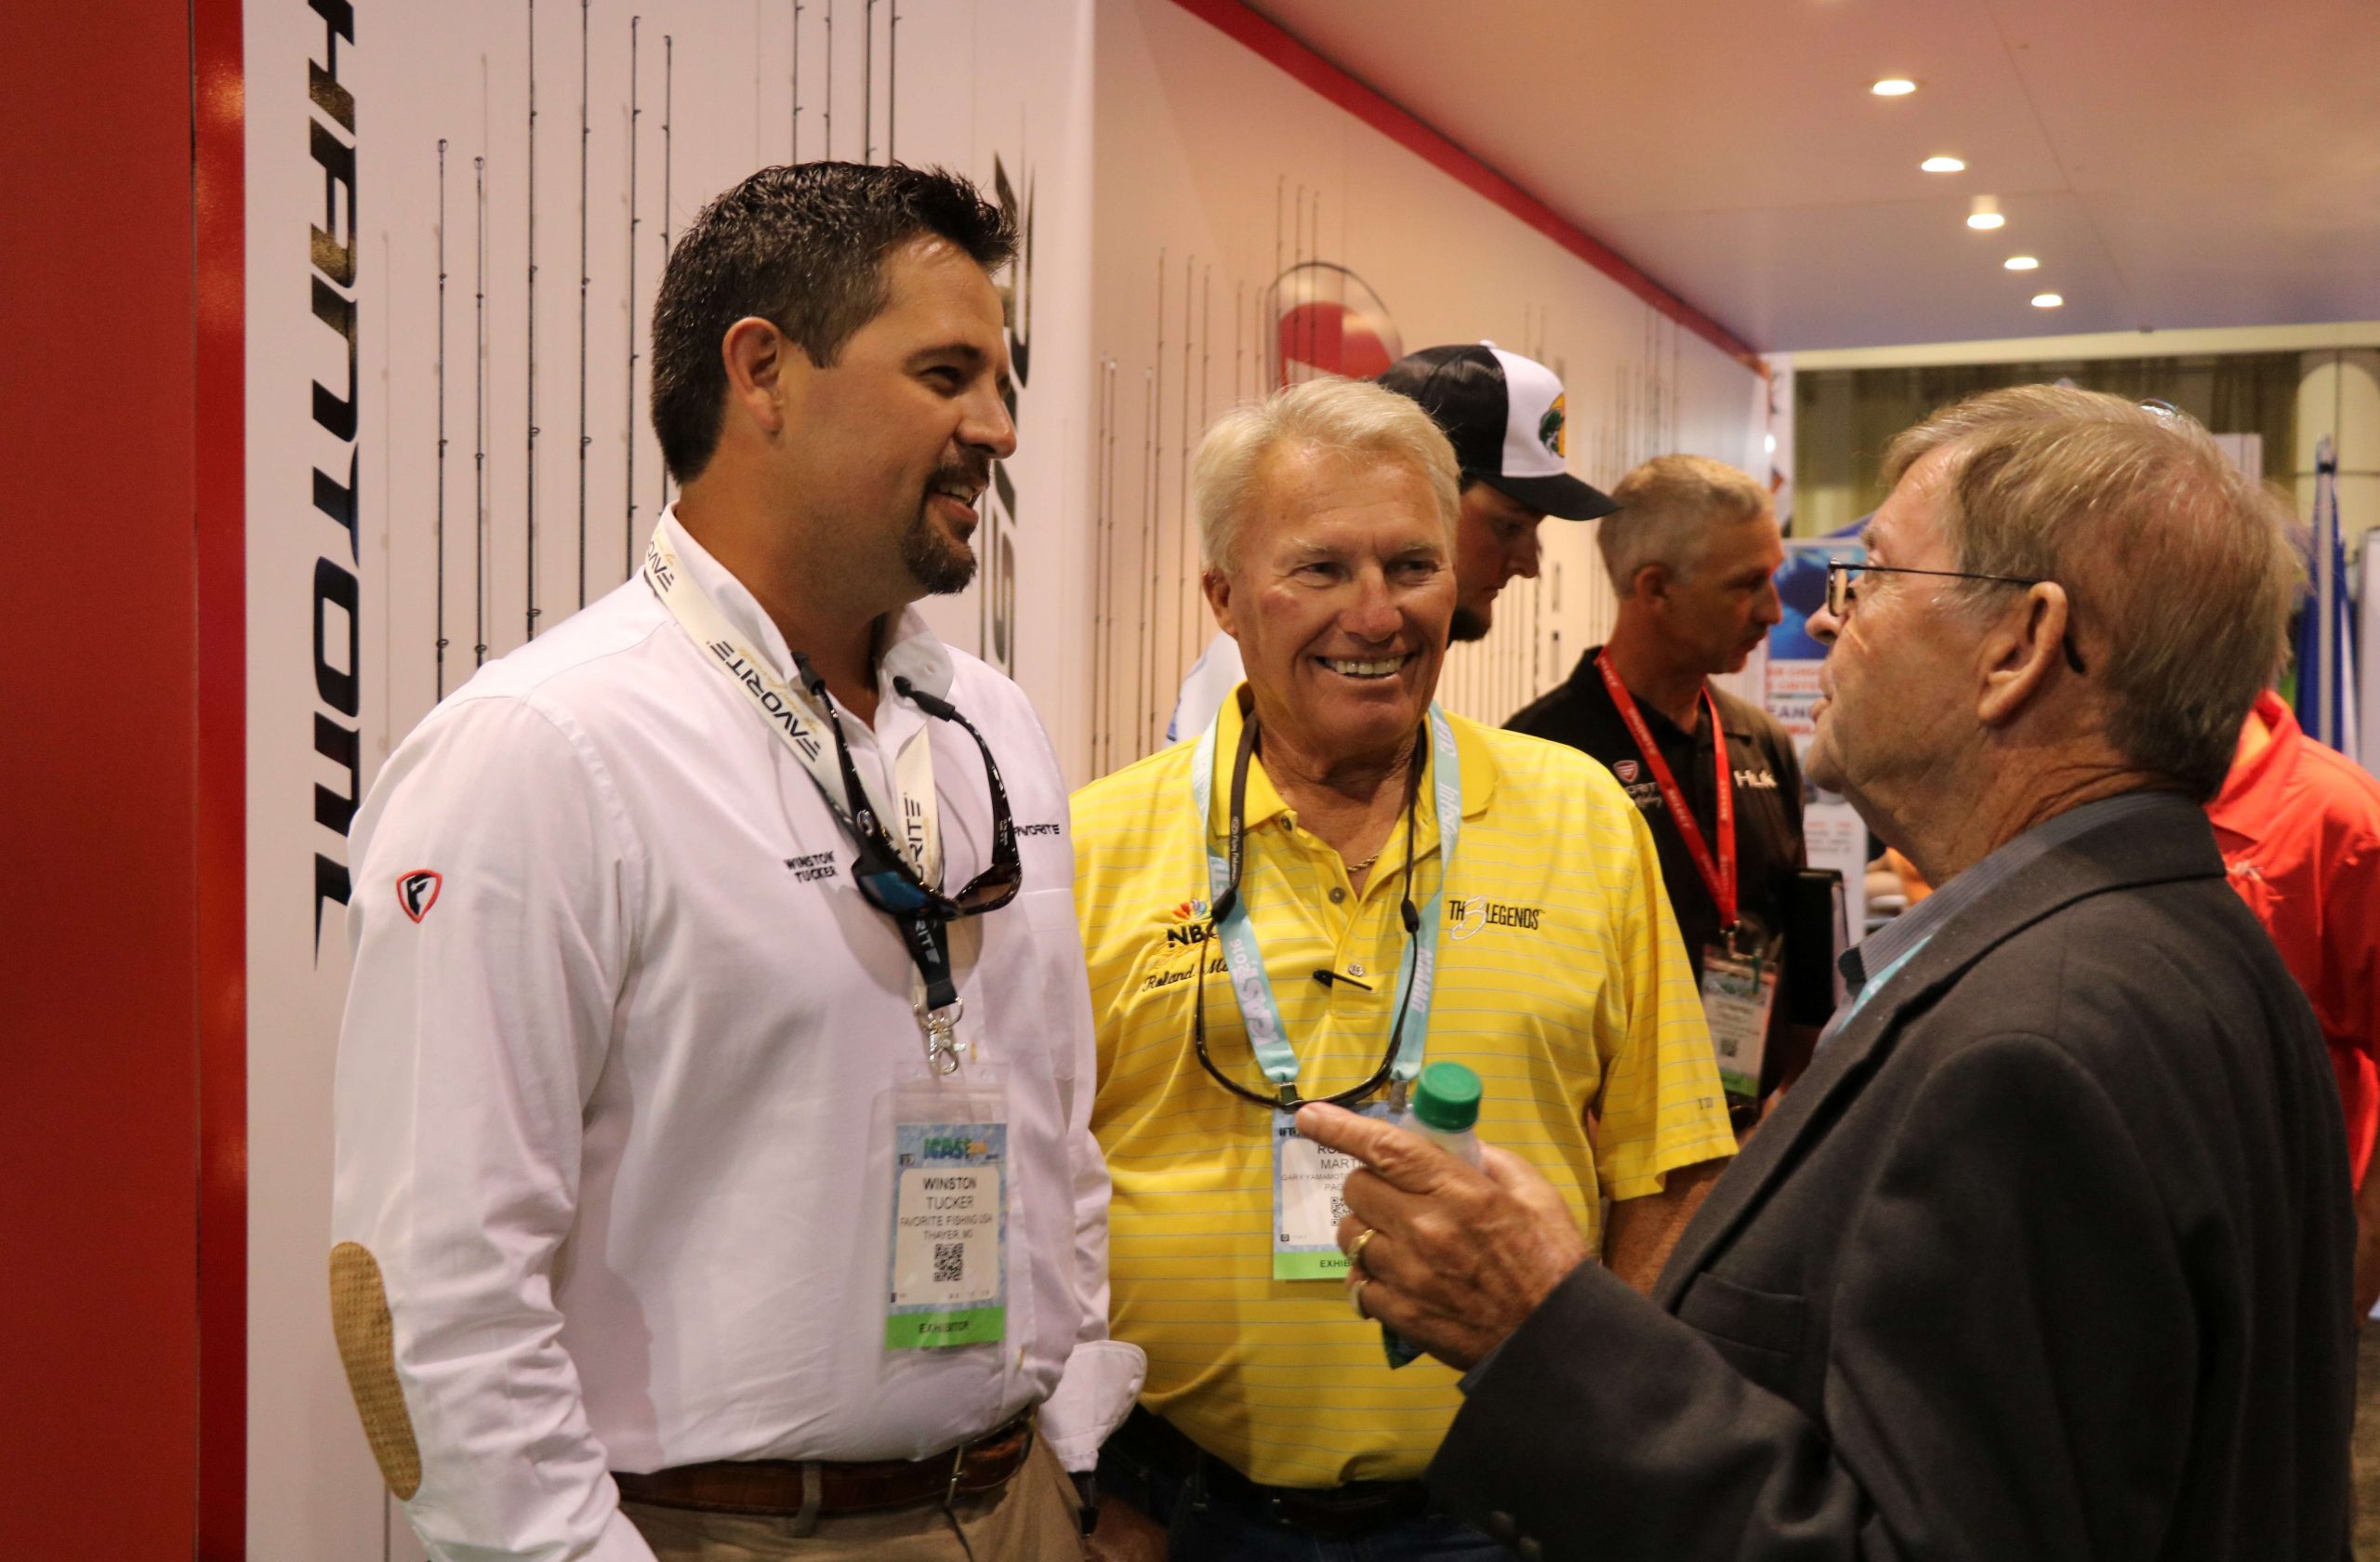 At left is Winston Tucker, a longtime sporting goods industry veteran, talking with the legendary Roland Martin and his associate Walt Reynolds. In 2016 Tucker started Favorite Fishing USA with the goal of applying advanced design technologies and premium materials to build a superior rod at an affordable price. He is the driving force behind the companyâs culture of Christianity, Youth Fishing, Quality and retailer profit. Tuckerâs businesses have thrived in Europe for more than a decade and Favorite Fishing USA comes as a result of that success. 